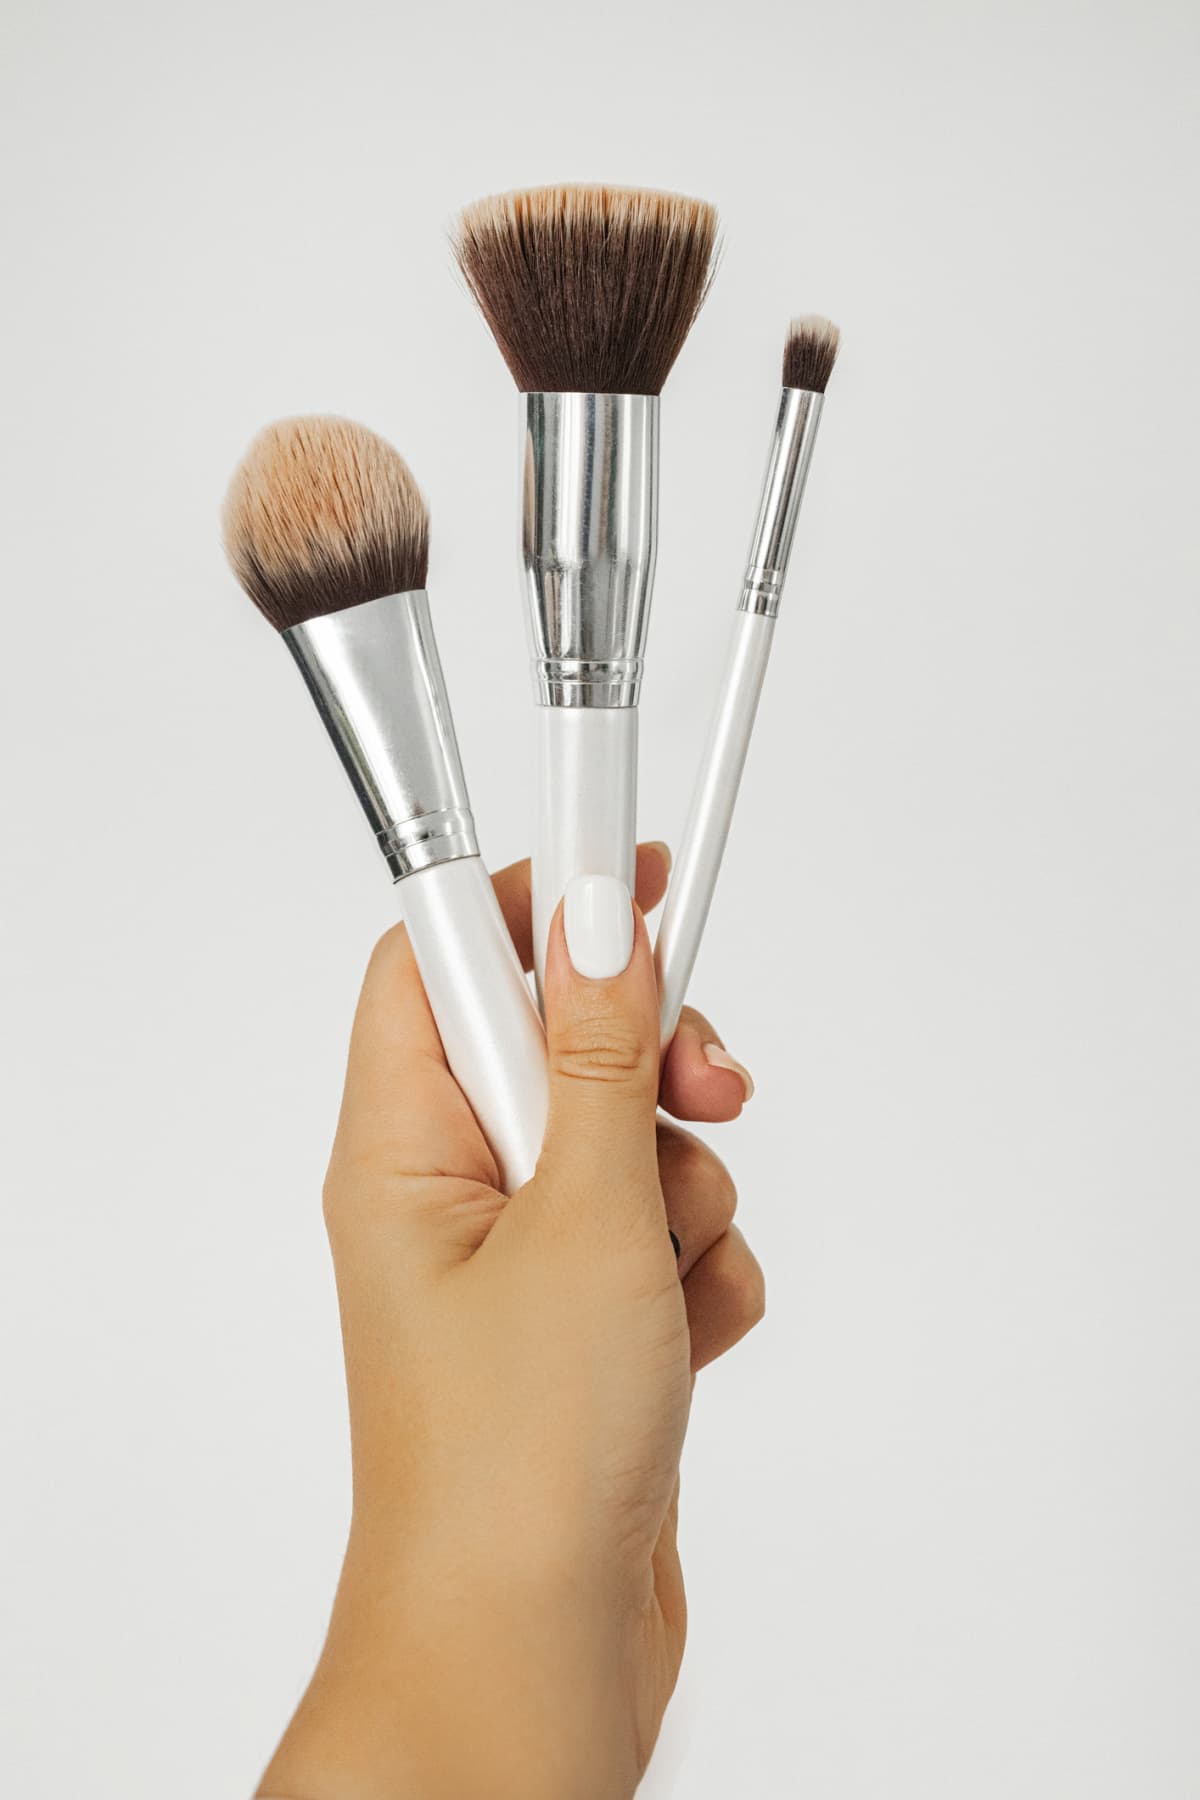 Hand holding three different types of duo-fiber makeup brushes